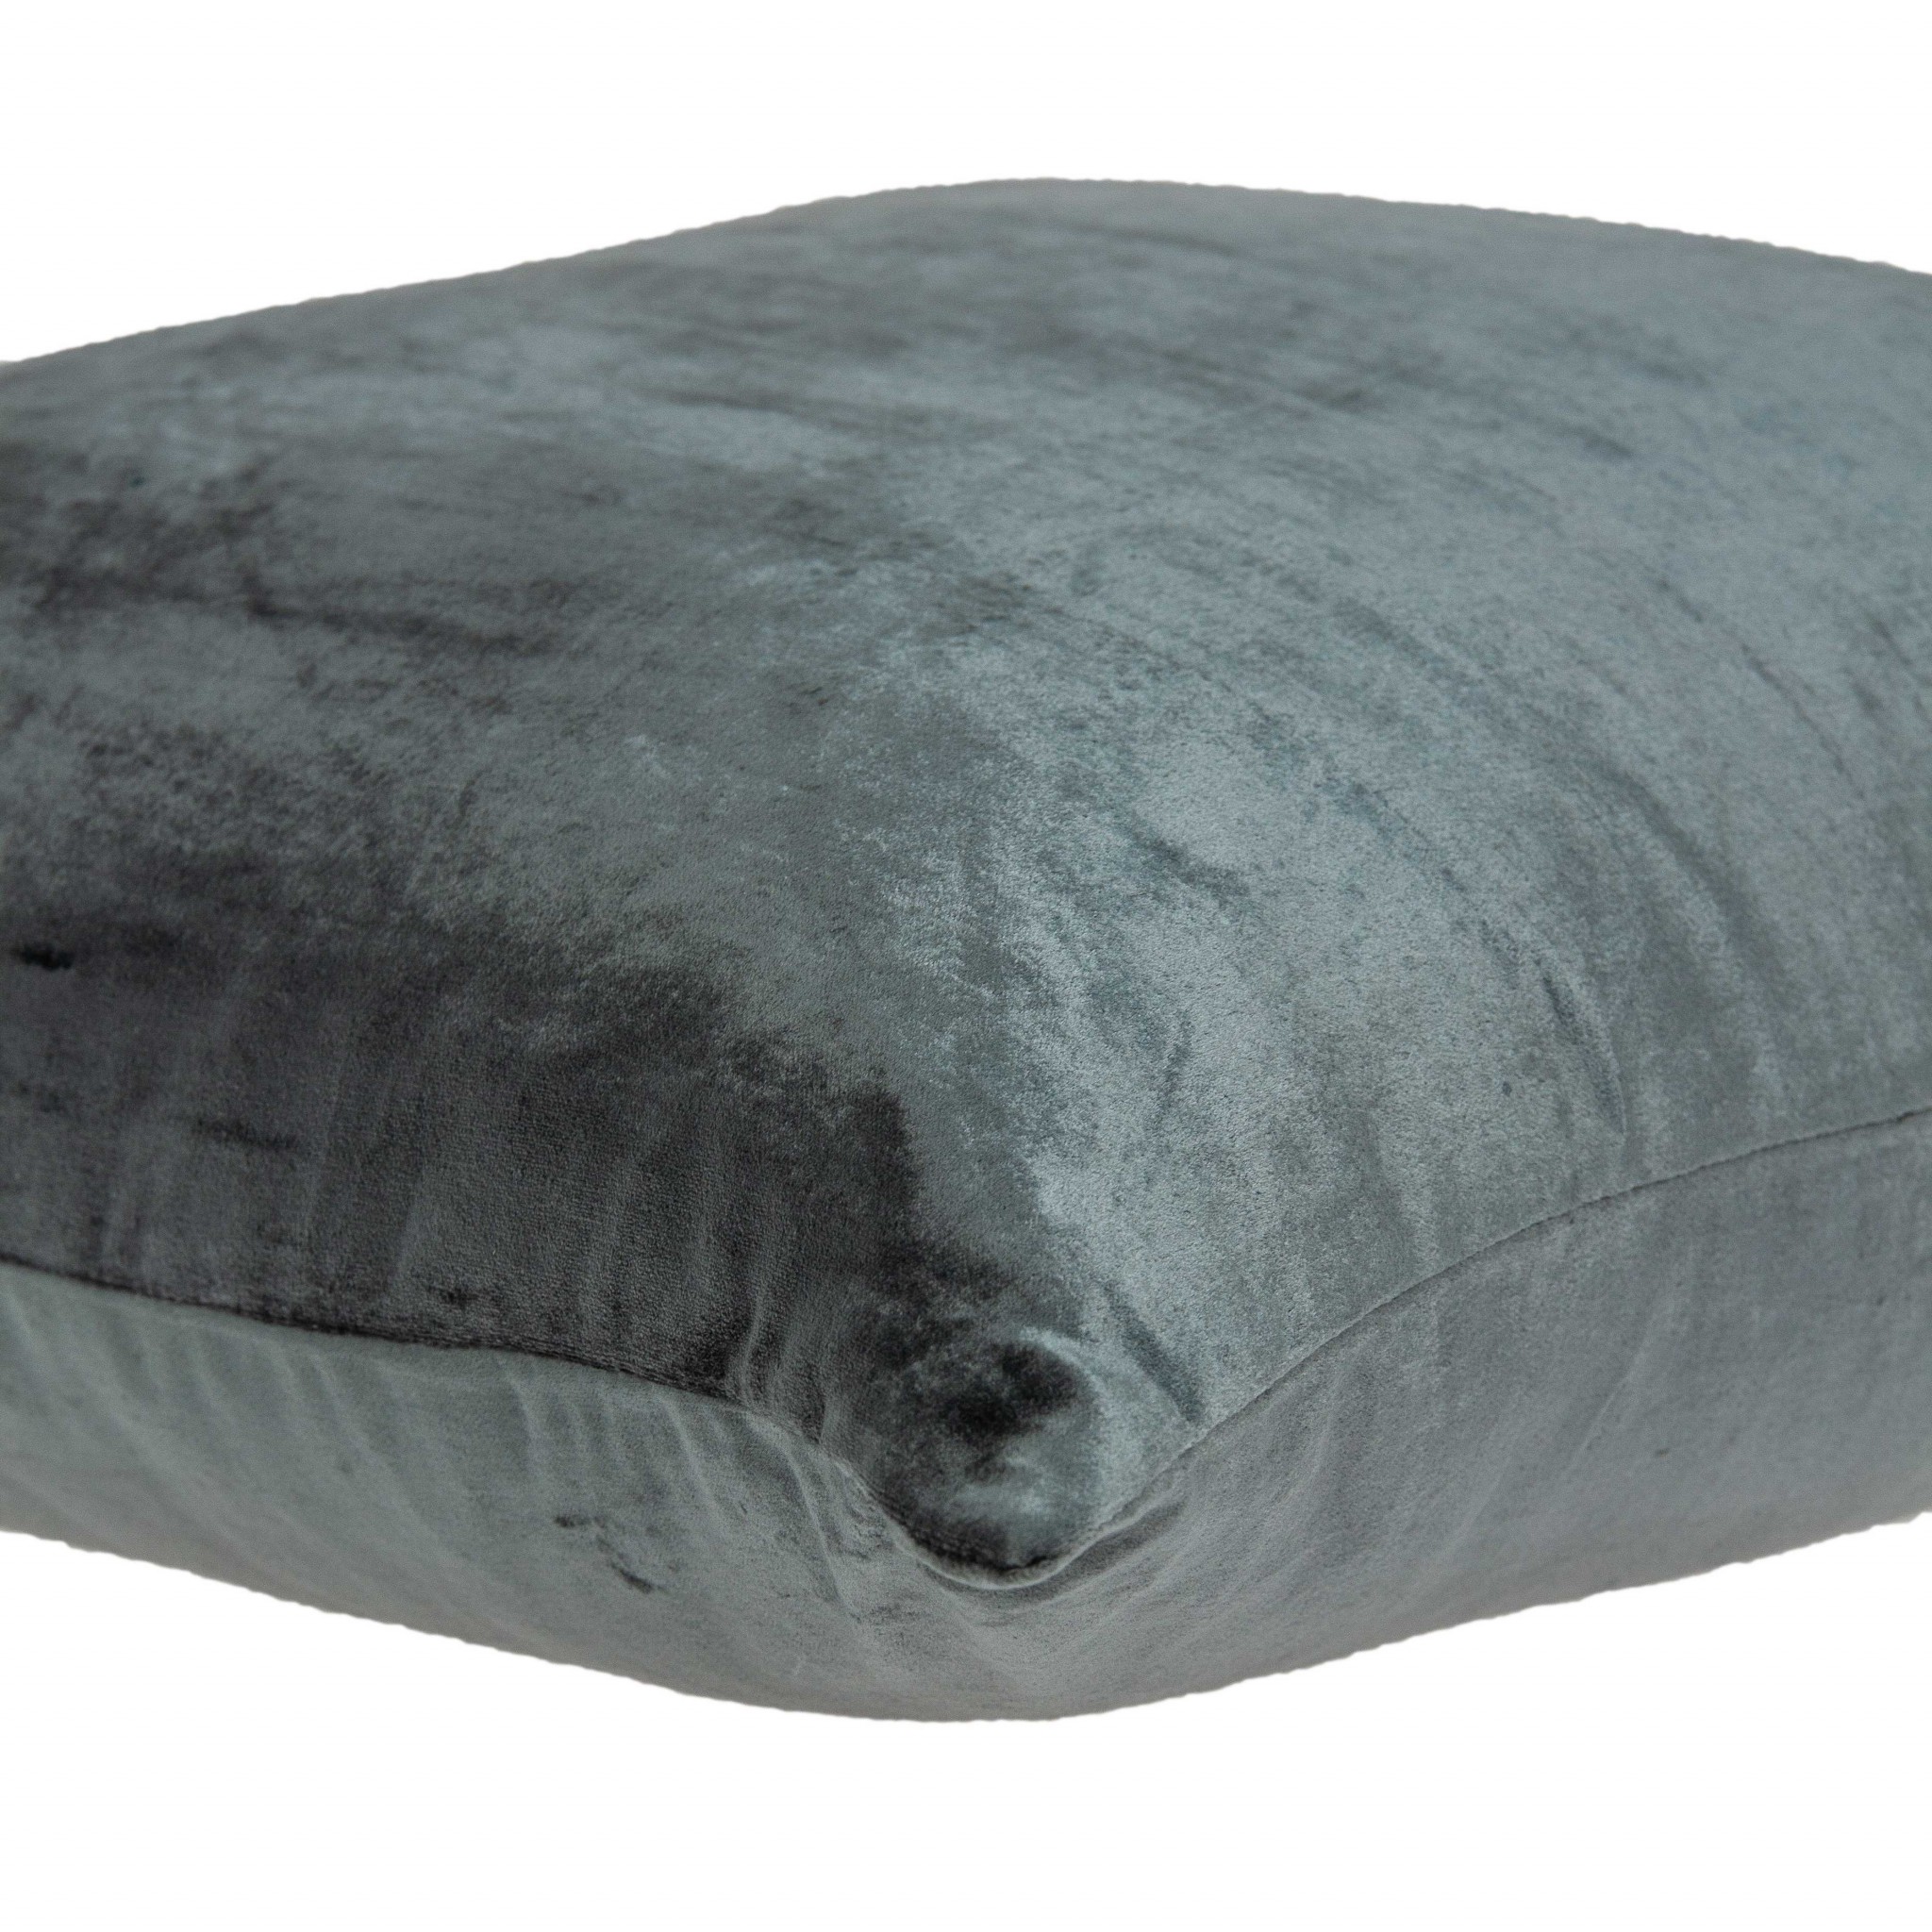 20" x 0.5" x 20" Transitional Charcoal Solid Pillow Cover